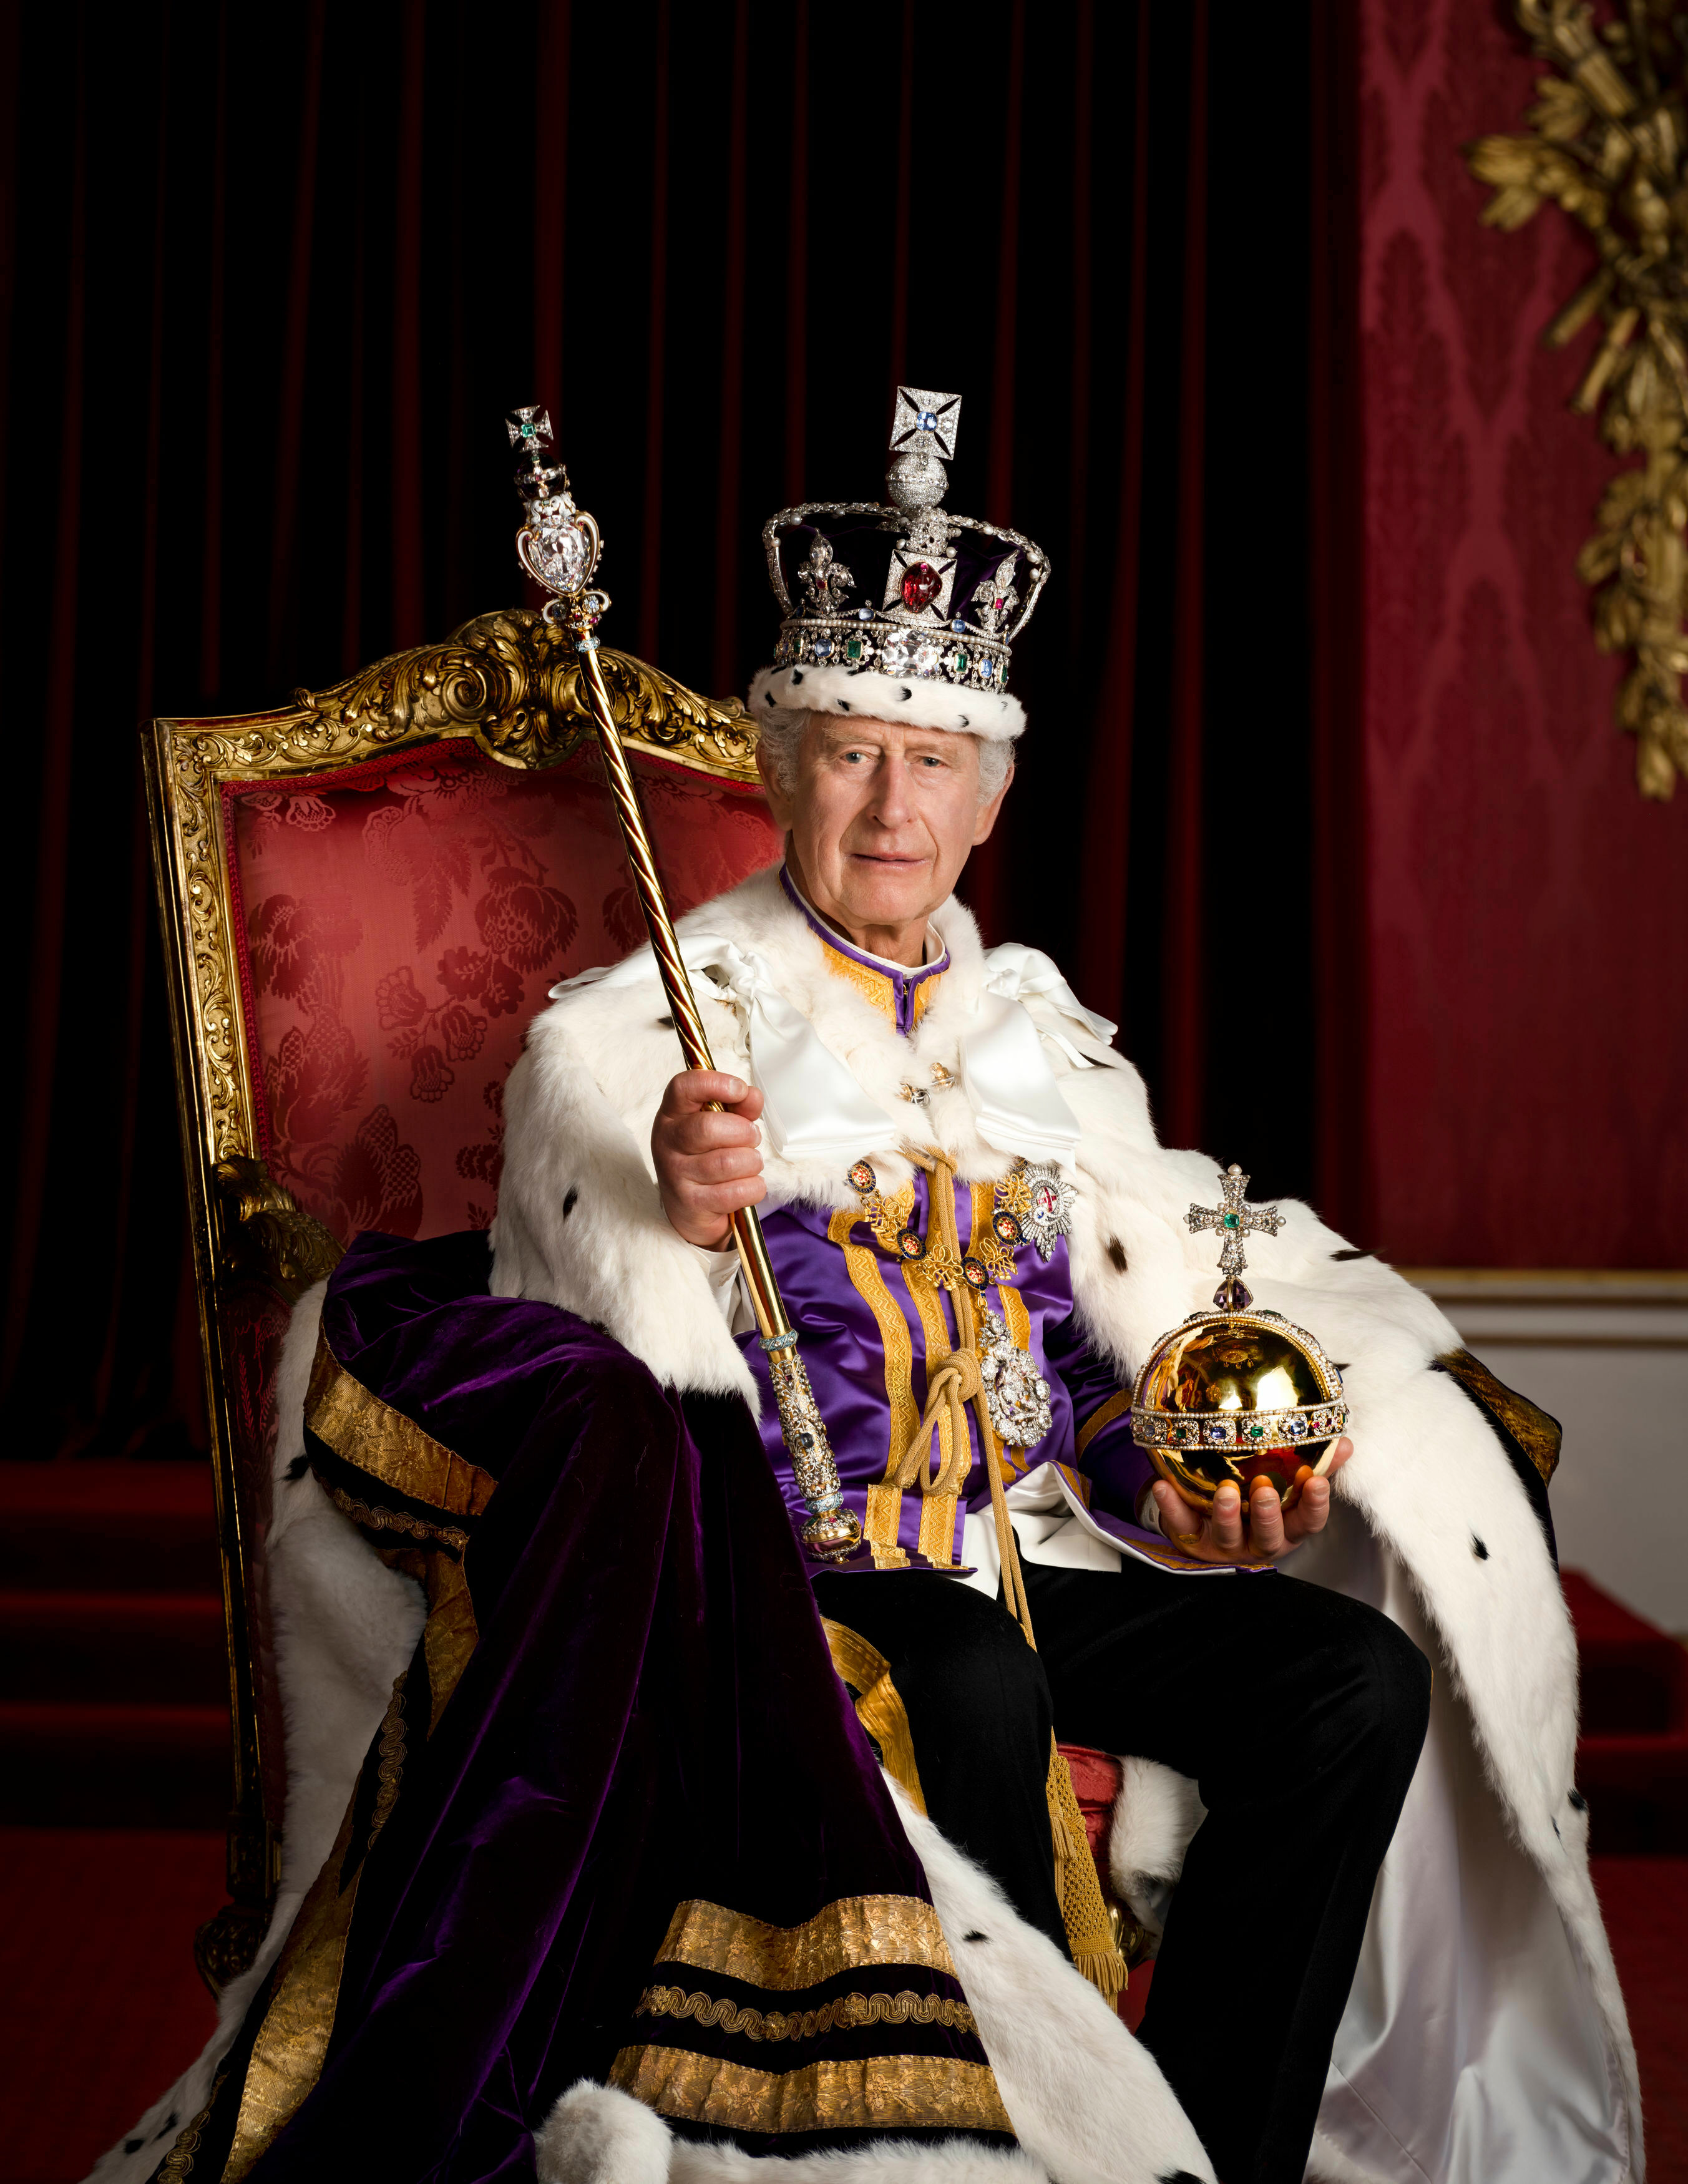 <p>King Charles III is pictured in full coronation regalia in the Throne Room at Buckingham Palace in London in one of four official <a href="https://www.wonderwall.com/celebrity/the-coronation-of-king-charles-iii-and-queen-camilla-the-best-pictures-of-all-the-royals-at-this-historic-event-735015.gallery">coronation</a> portraits released to the public on May 8, 2023. The monarch is seen wearing the Robe of Estate and the Imperial State Crown and is holding the Sovereign's Orb and Sovereign's Sceptre with Cross. He is seated on one of a pair of 1902 throne chairs that were made for the future King George V and Queen Mary for use at the coronation of King Edward VII. These throne chairs were also used in the background of the 1937 Coronation of King George VI and Queen Elizabeth II and by King Charles III and Queen Camilla at Westminster Hall to receive addresses from the Speakers of both Houses of Parliament in 2022.</p>